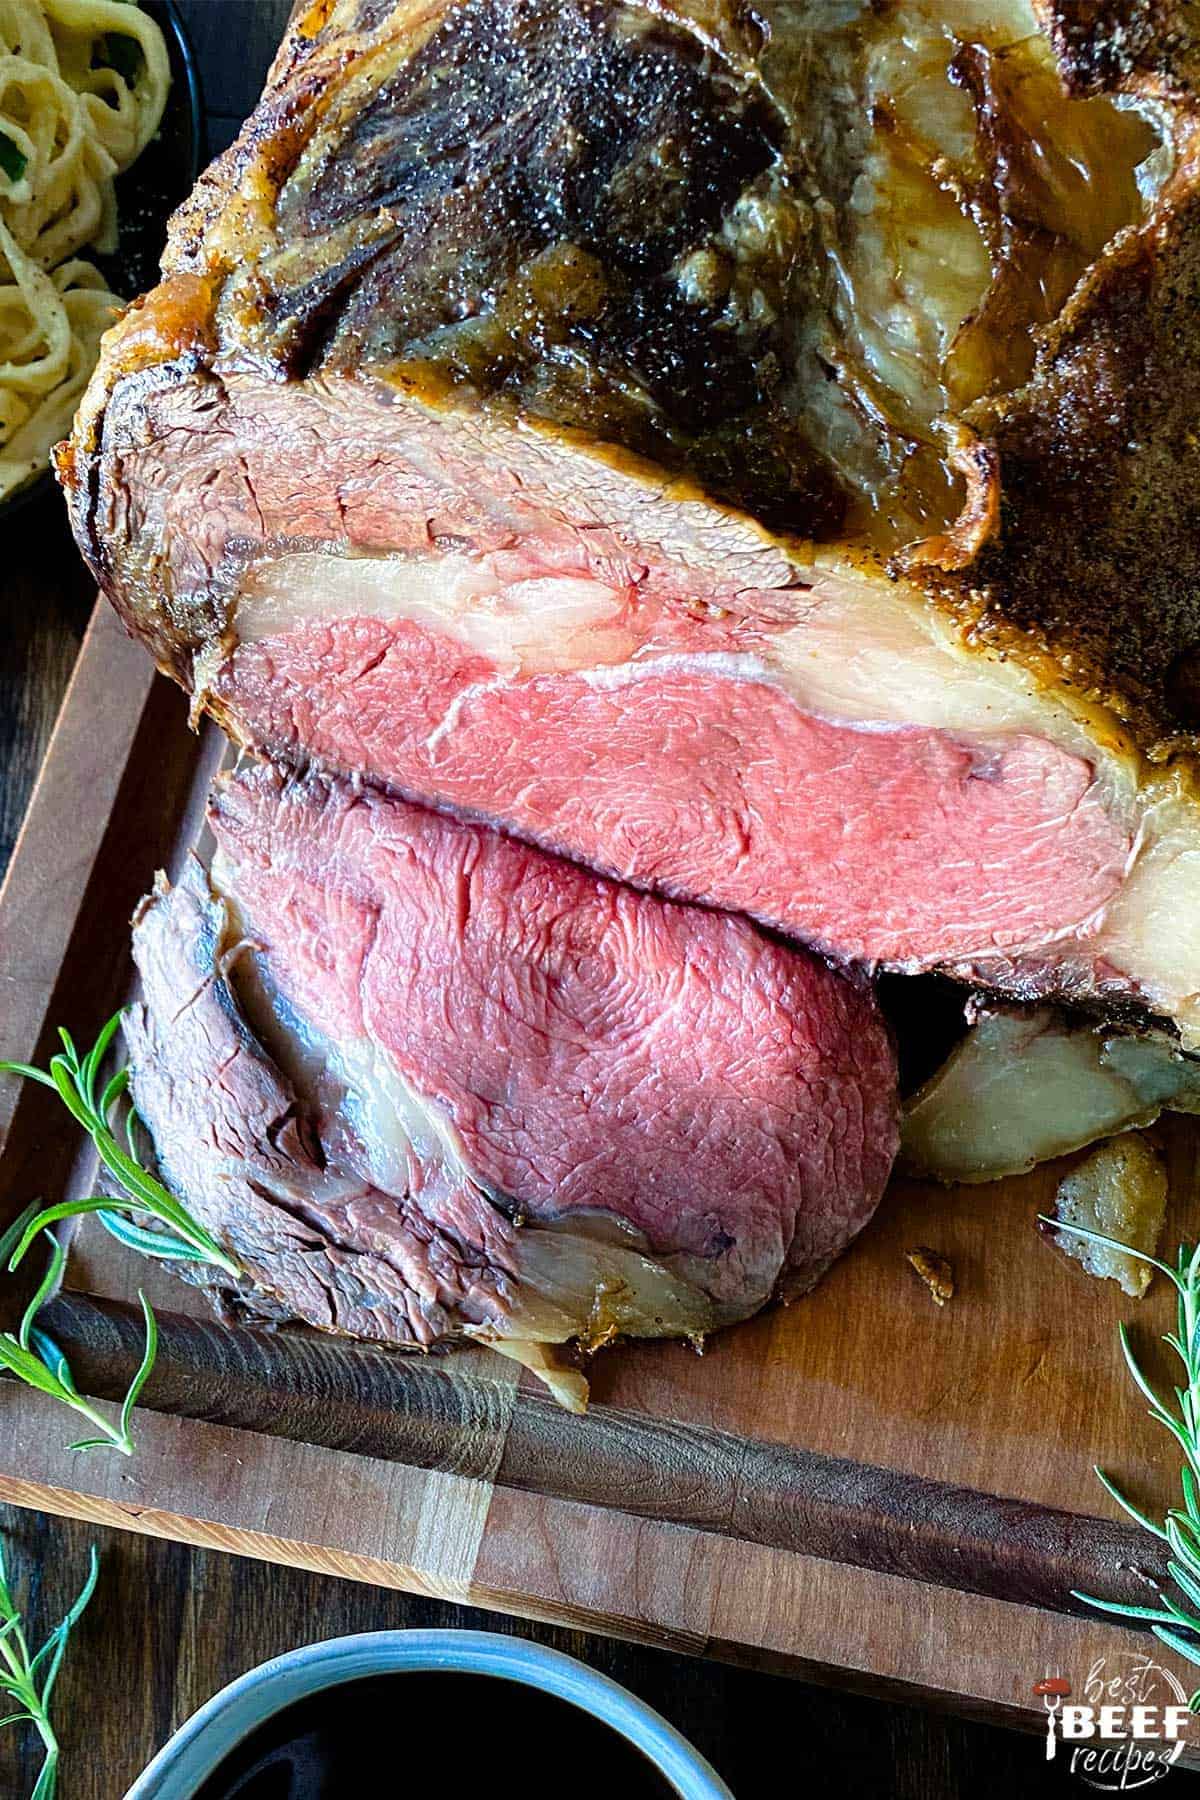 Sliced prime rib roast on a cutting board with herbs